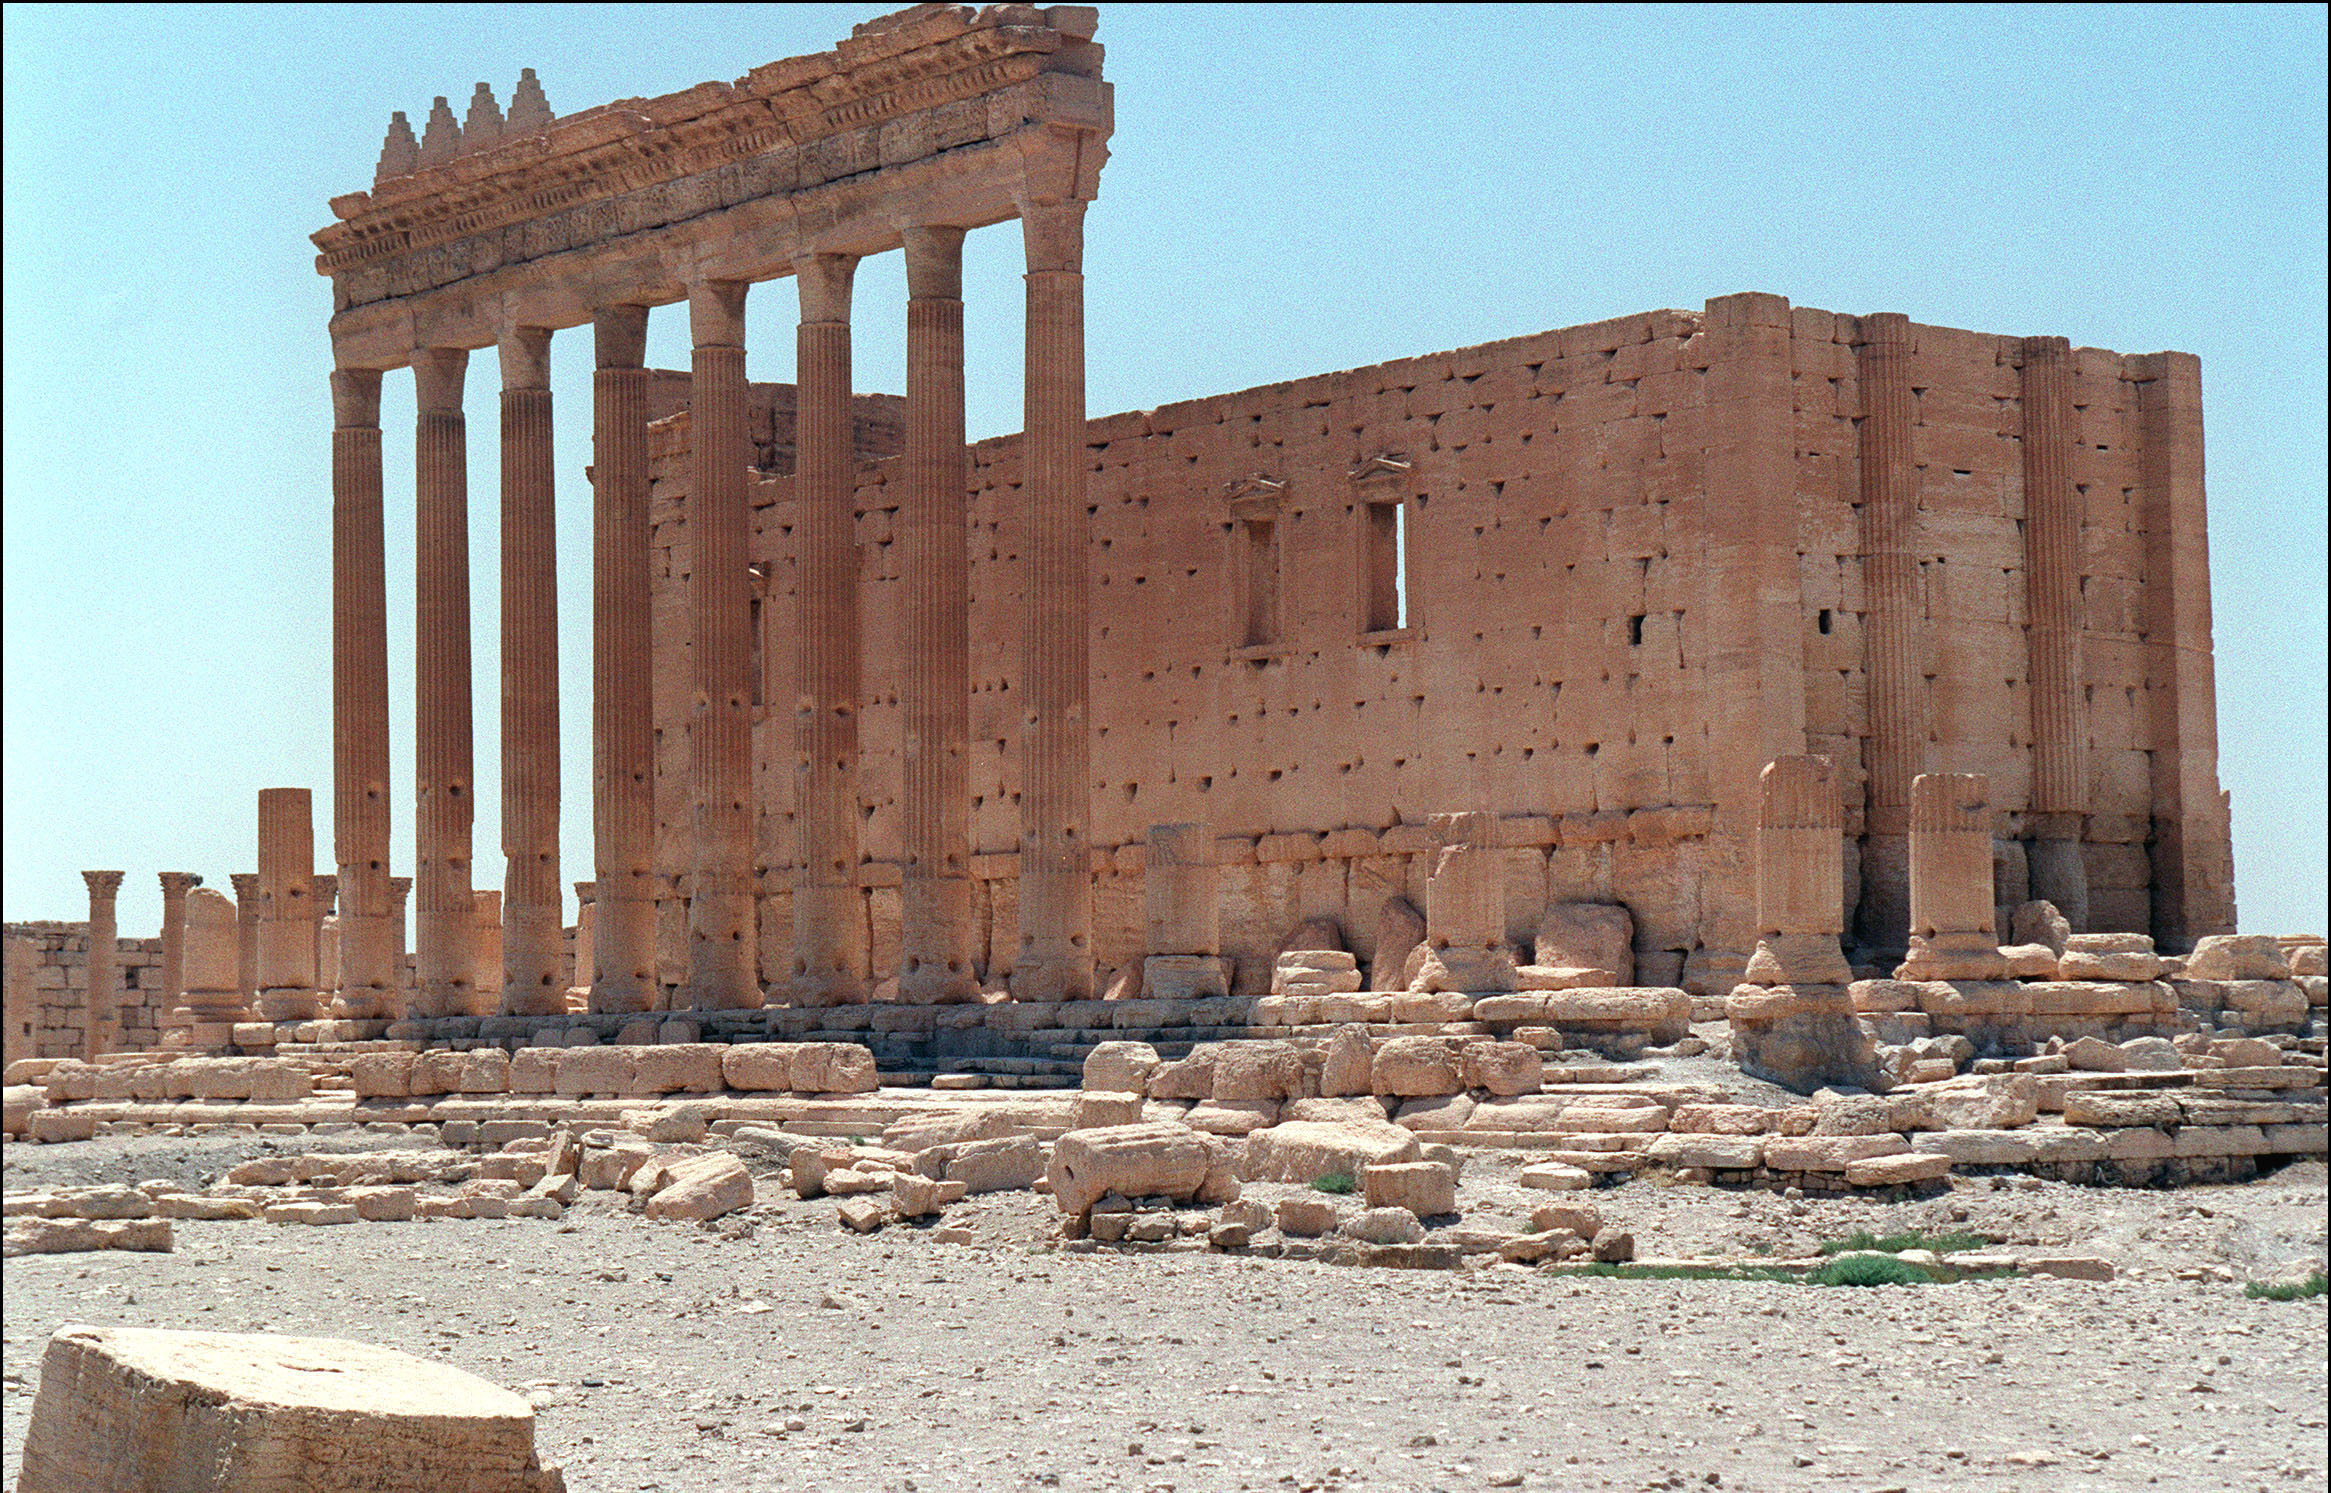 PHOTO: The Temple of Bel in the city of Palmyra.